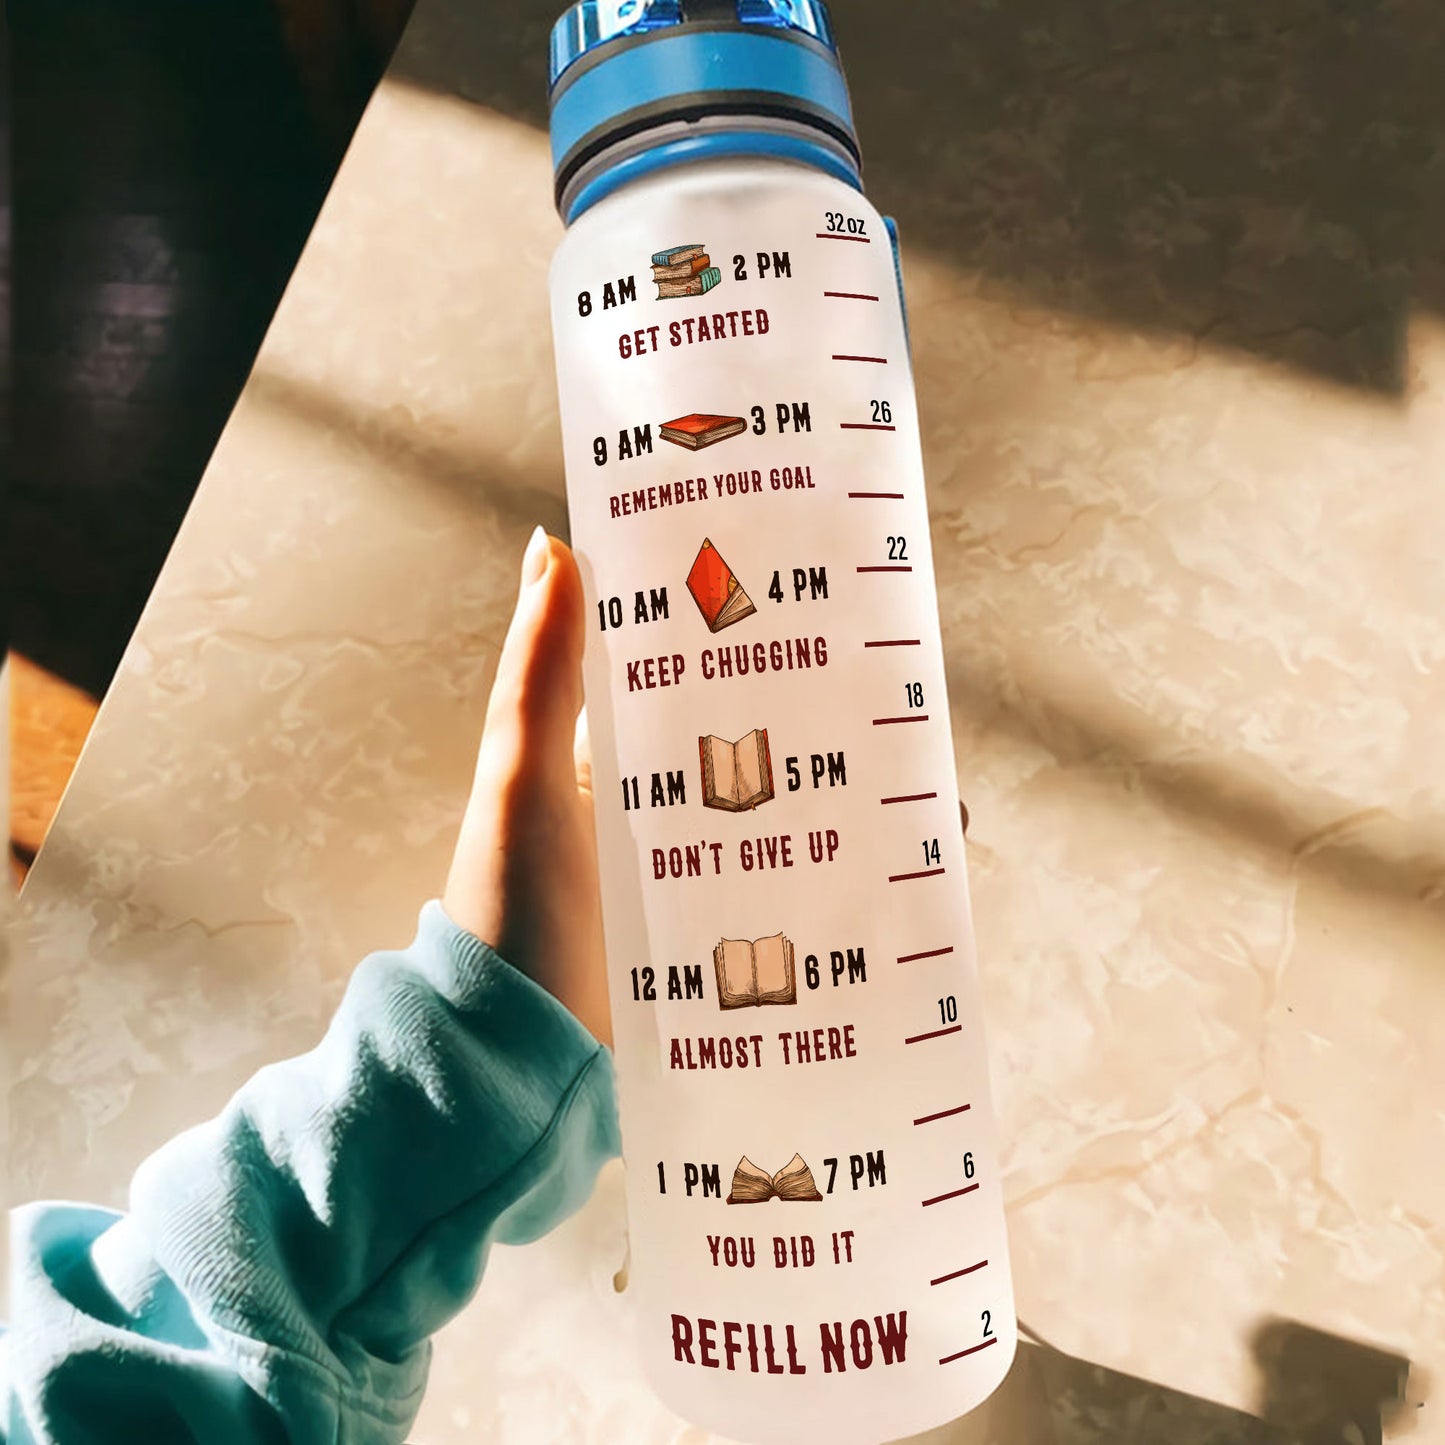 Just A Girl Who Loves Books - Personalized Water Tracker Bottle  - Birthday Gift For Her, Girl, Woman, Book Lovers, Book Worm